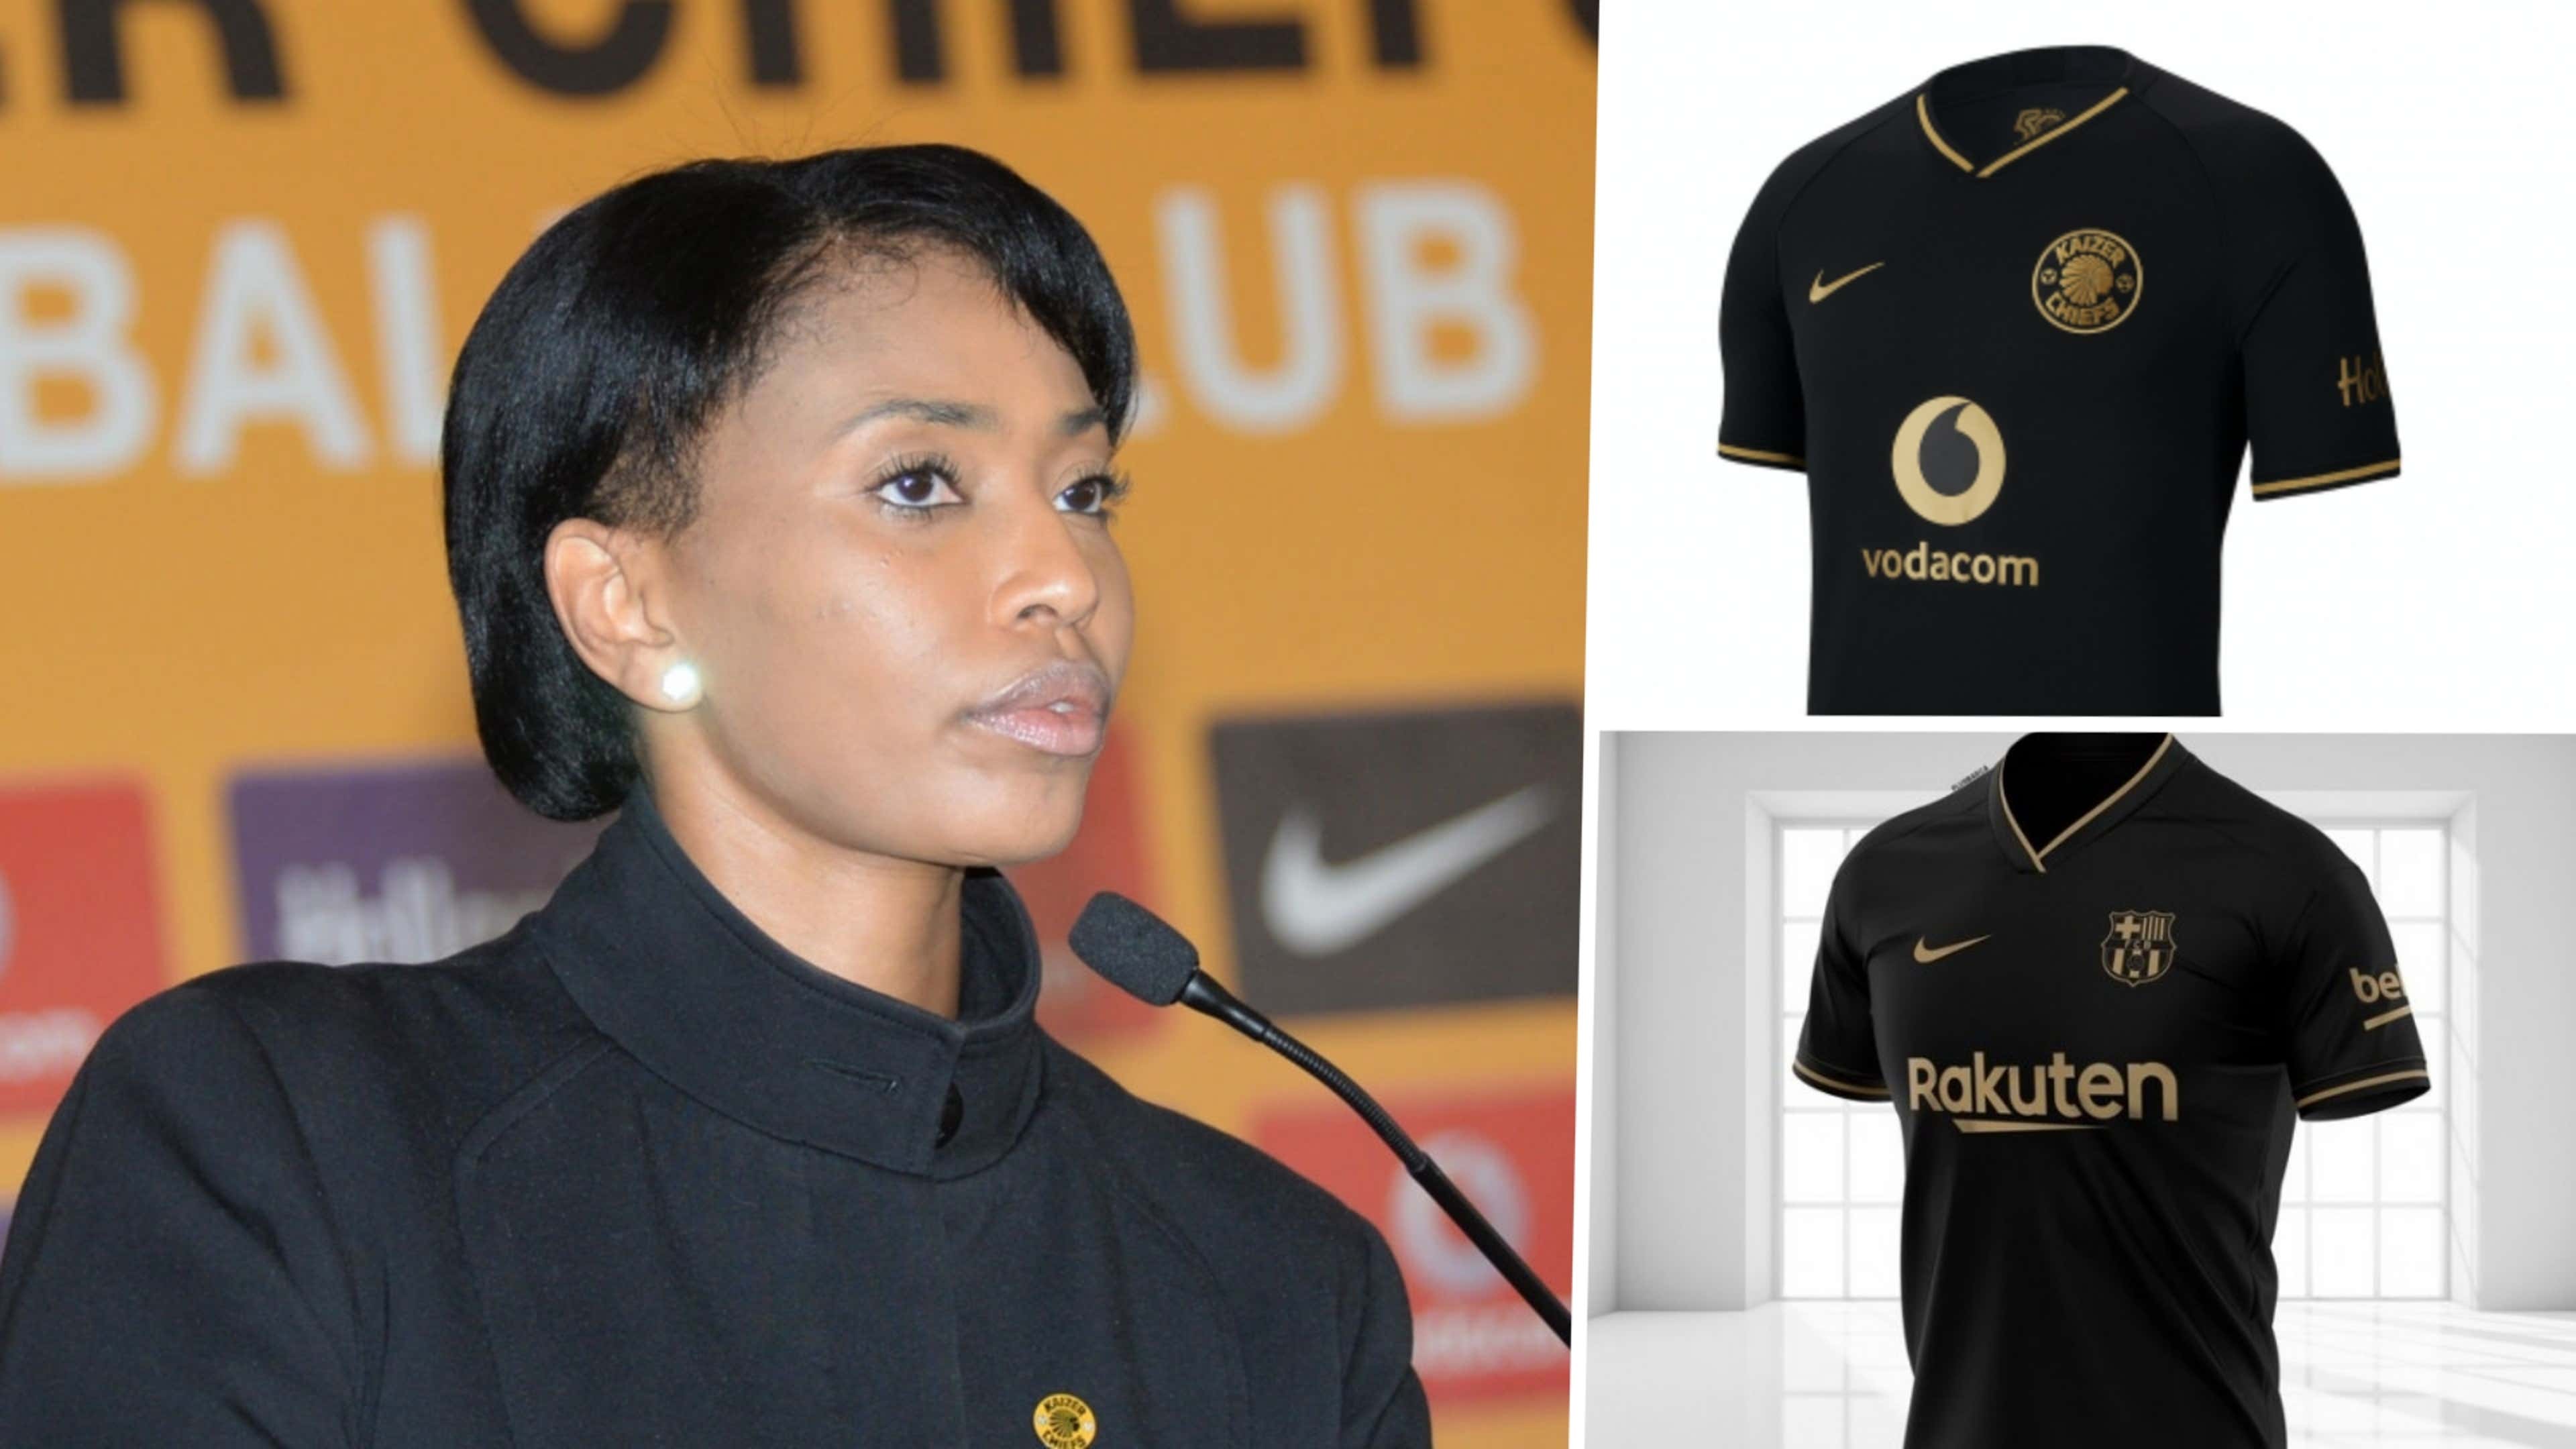 Barcelona's new away jersey took Kaizer Chiefs by surprise